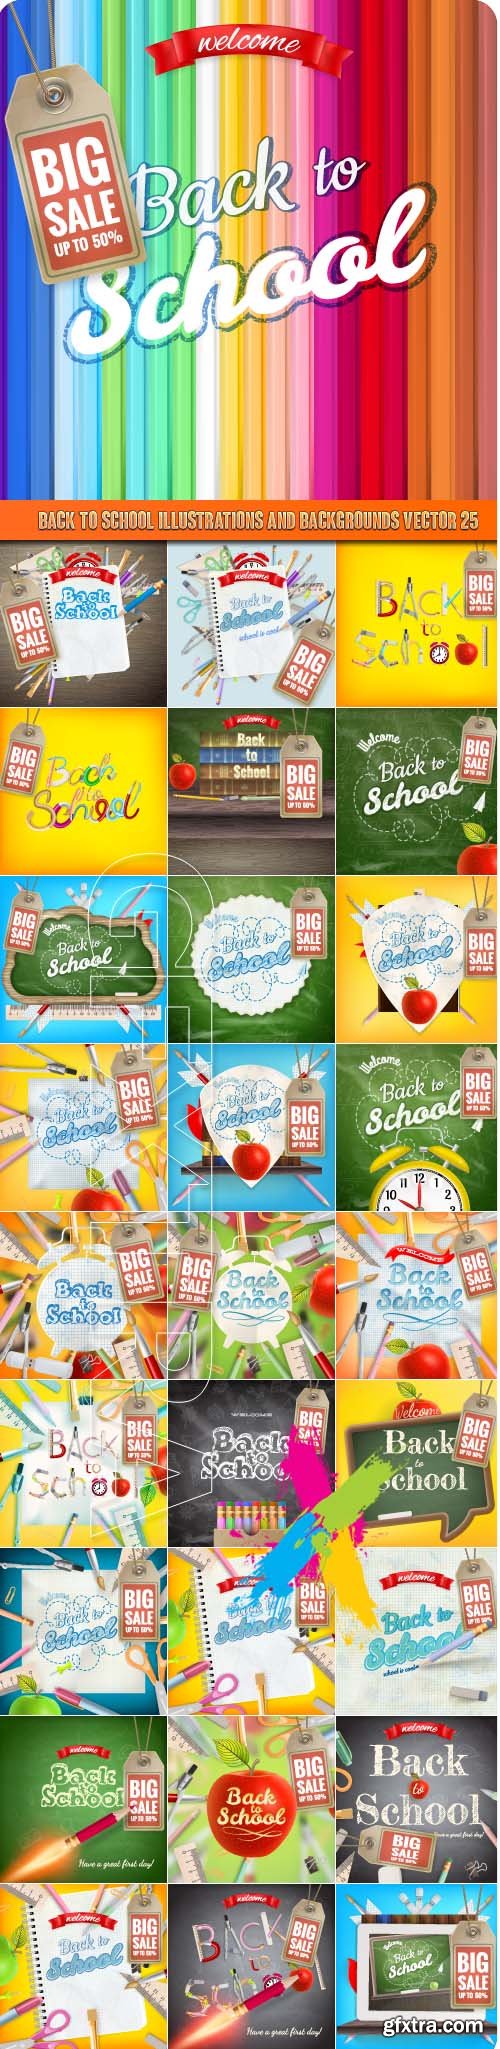 Back to school illustrations and backgrounds vector 25